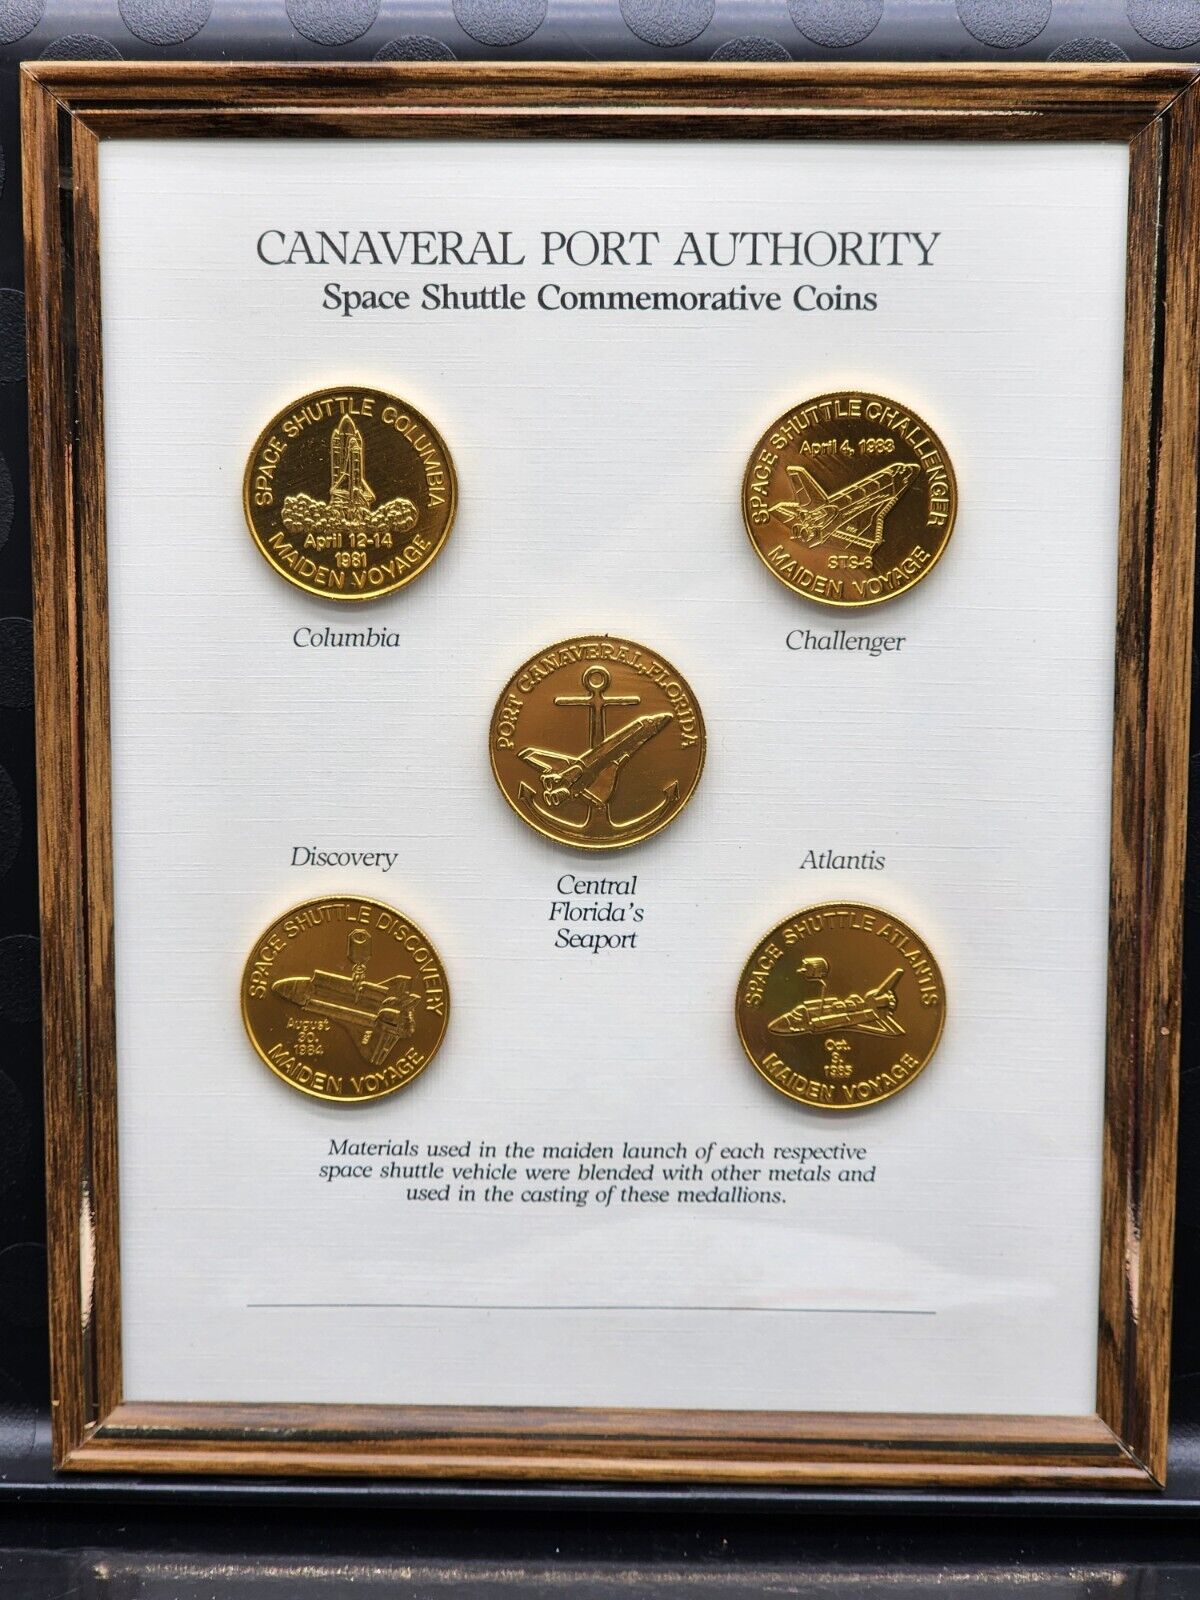 5 Canaveral Port Authority Maiden Launch Commemorative Medallions Coins NASA